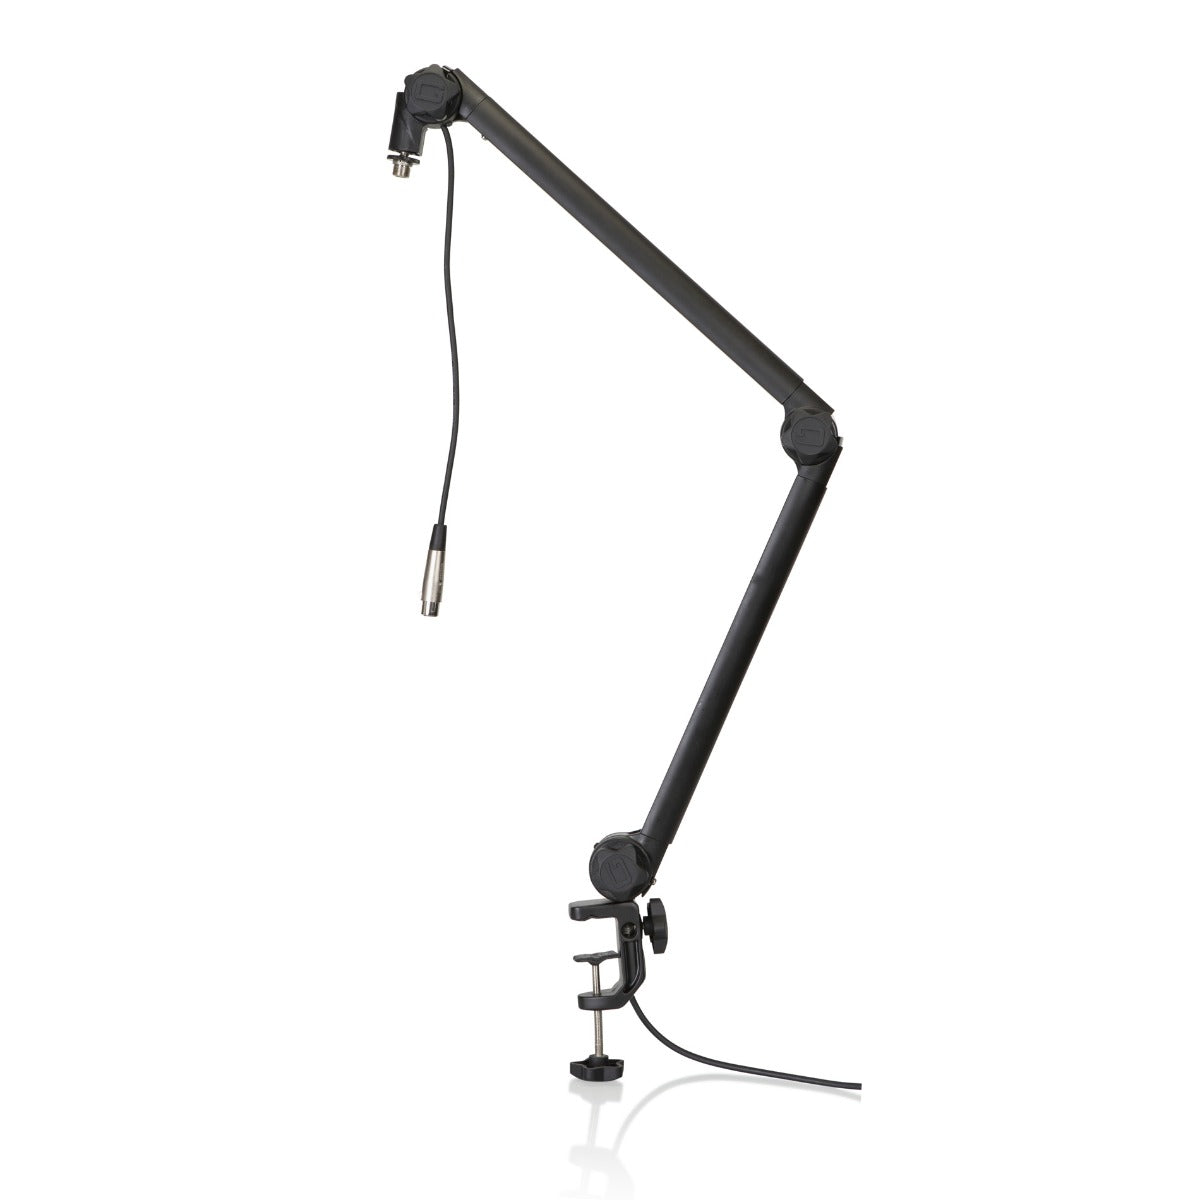 Image of all the pieces that make up the Gator Frameworks Deluxe Desktop Mic Boom Stand